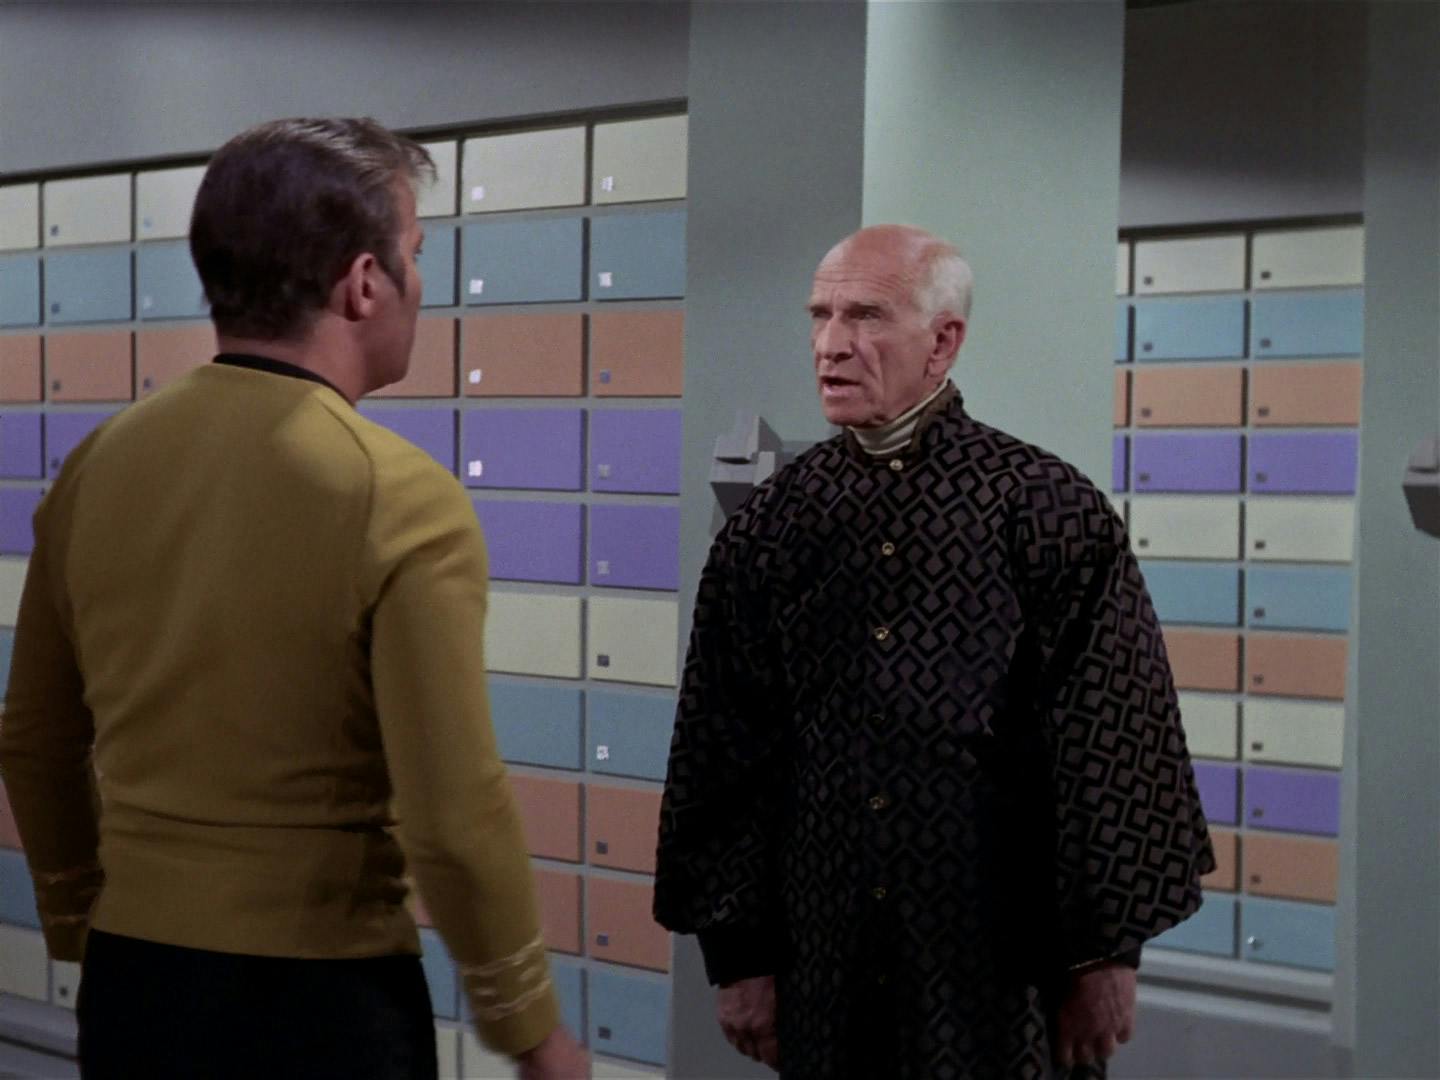 The librarian Altoz faces Kirk directly at his library in Sarpeidon in 'All Our Yesterdays'